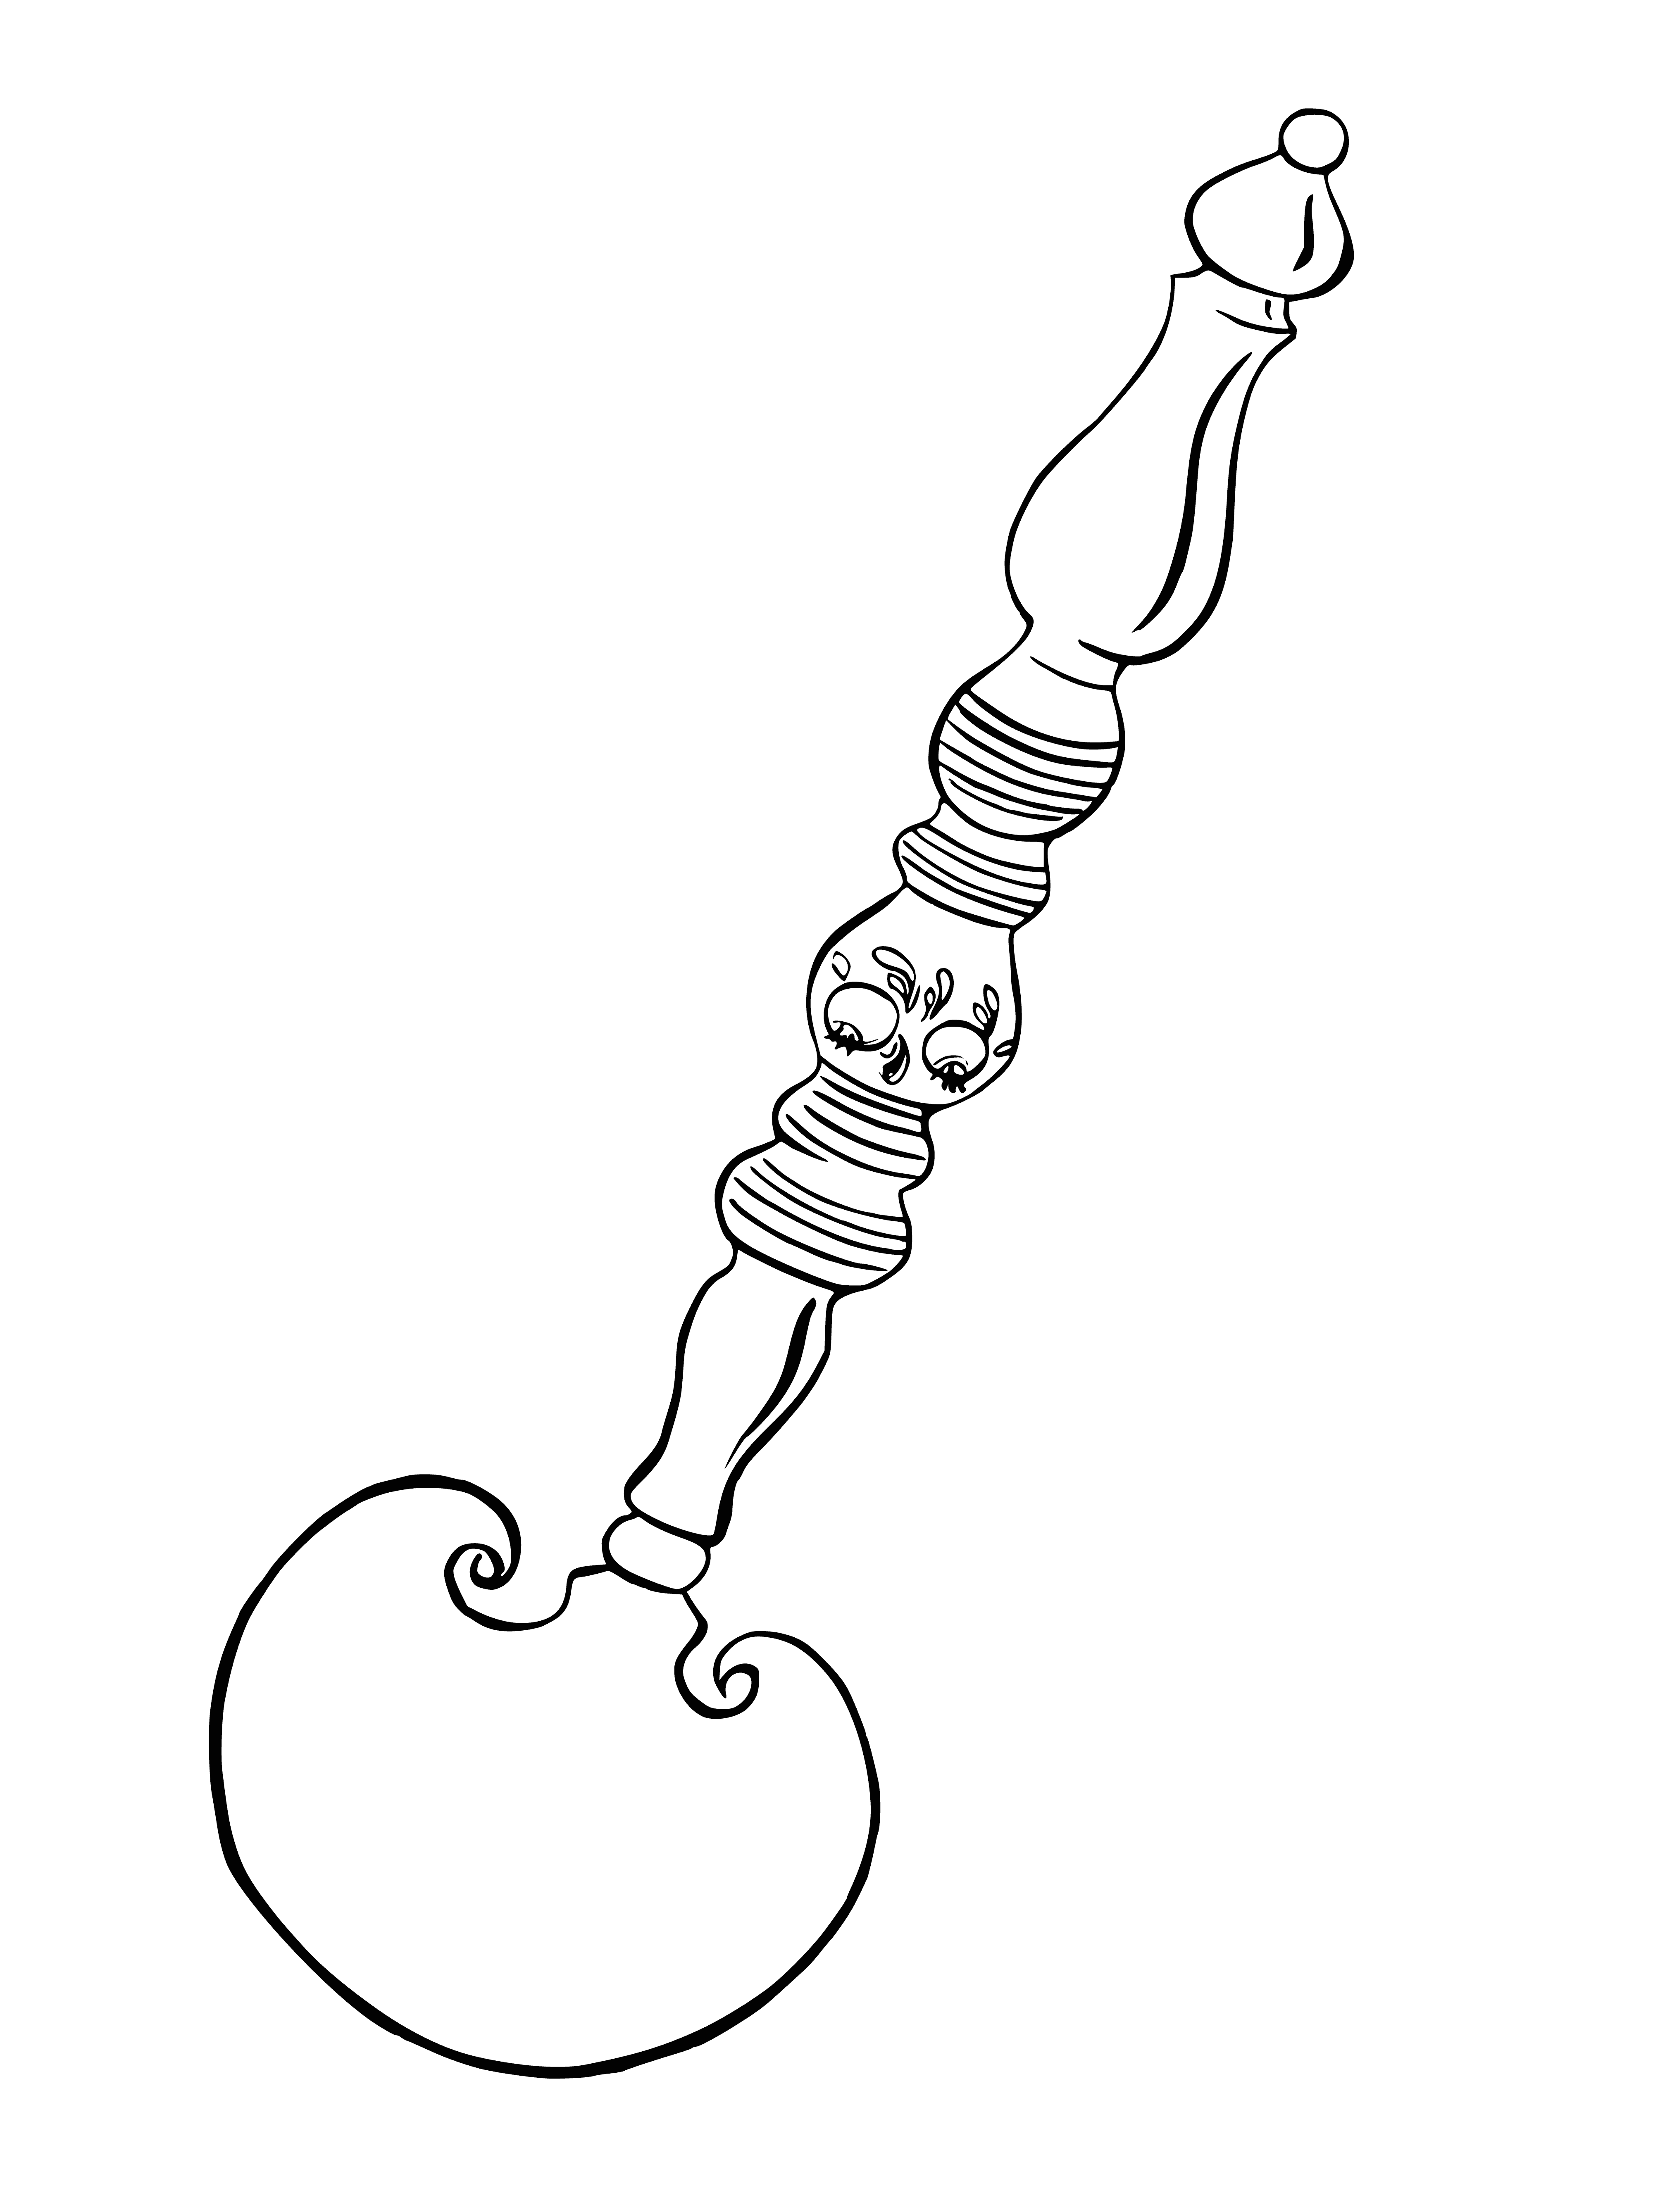 Cutting coloring page